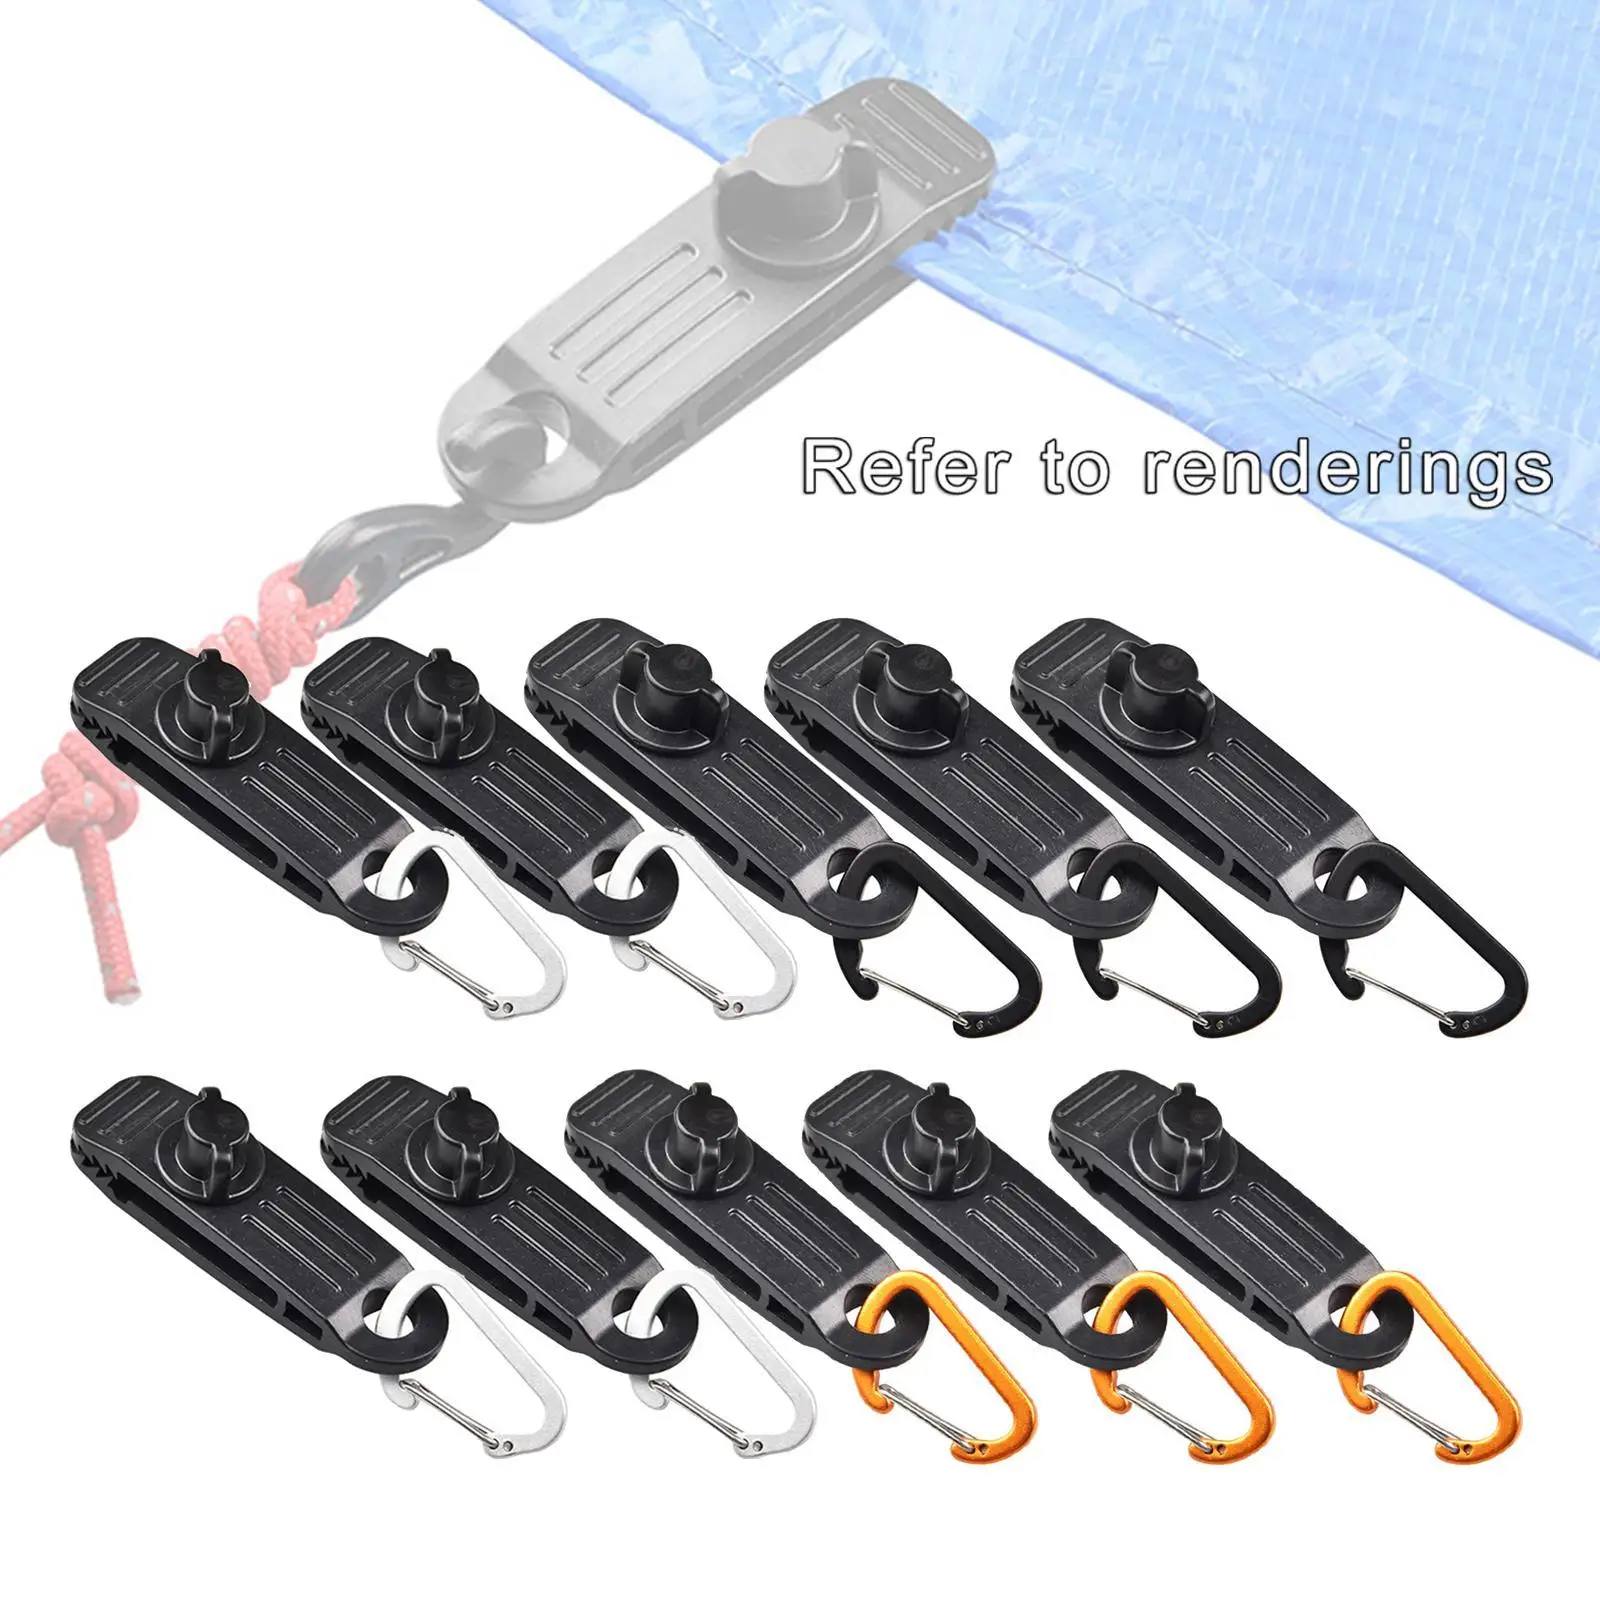 10 Durable Tarp Clips Buckles Tarpaulin Tent Snaps Clamps Hiking Backpacking